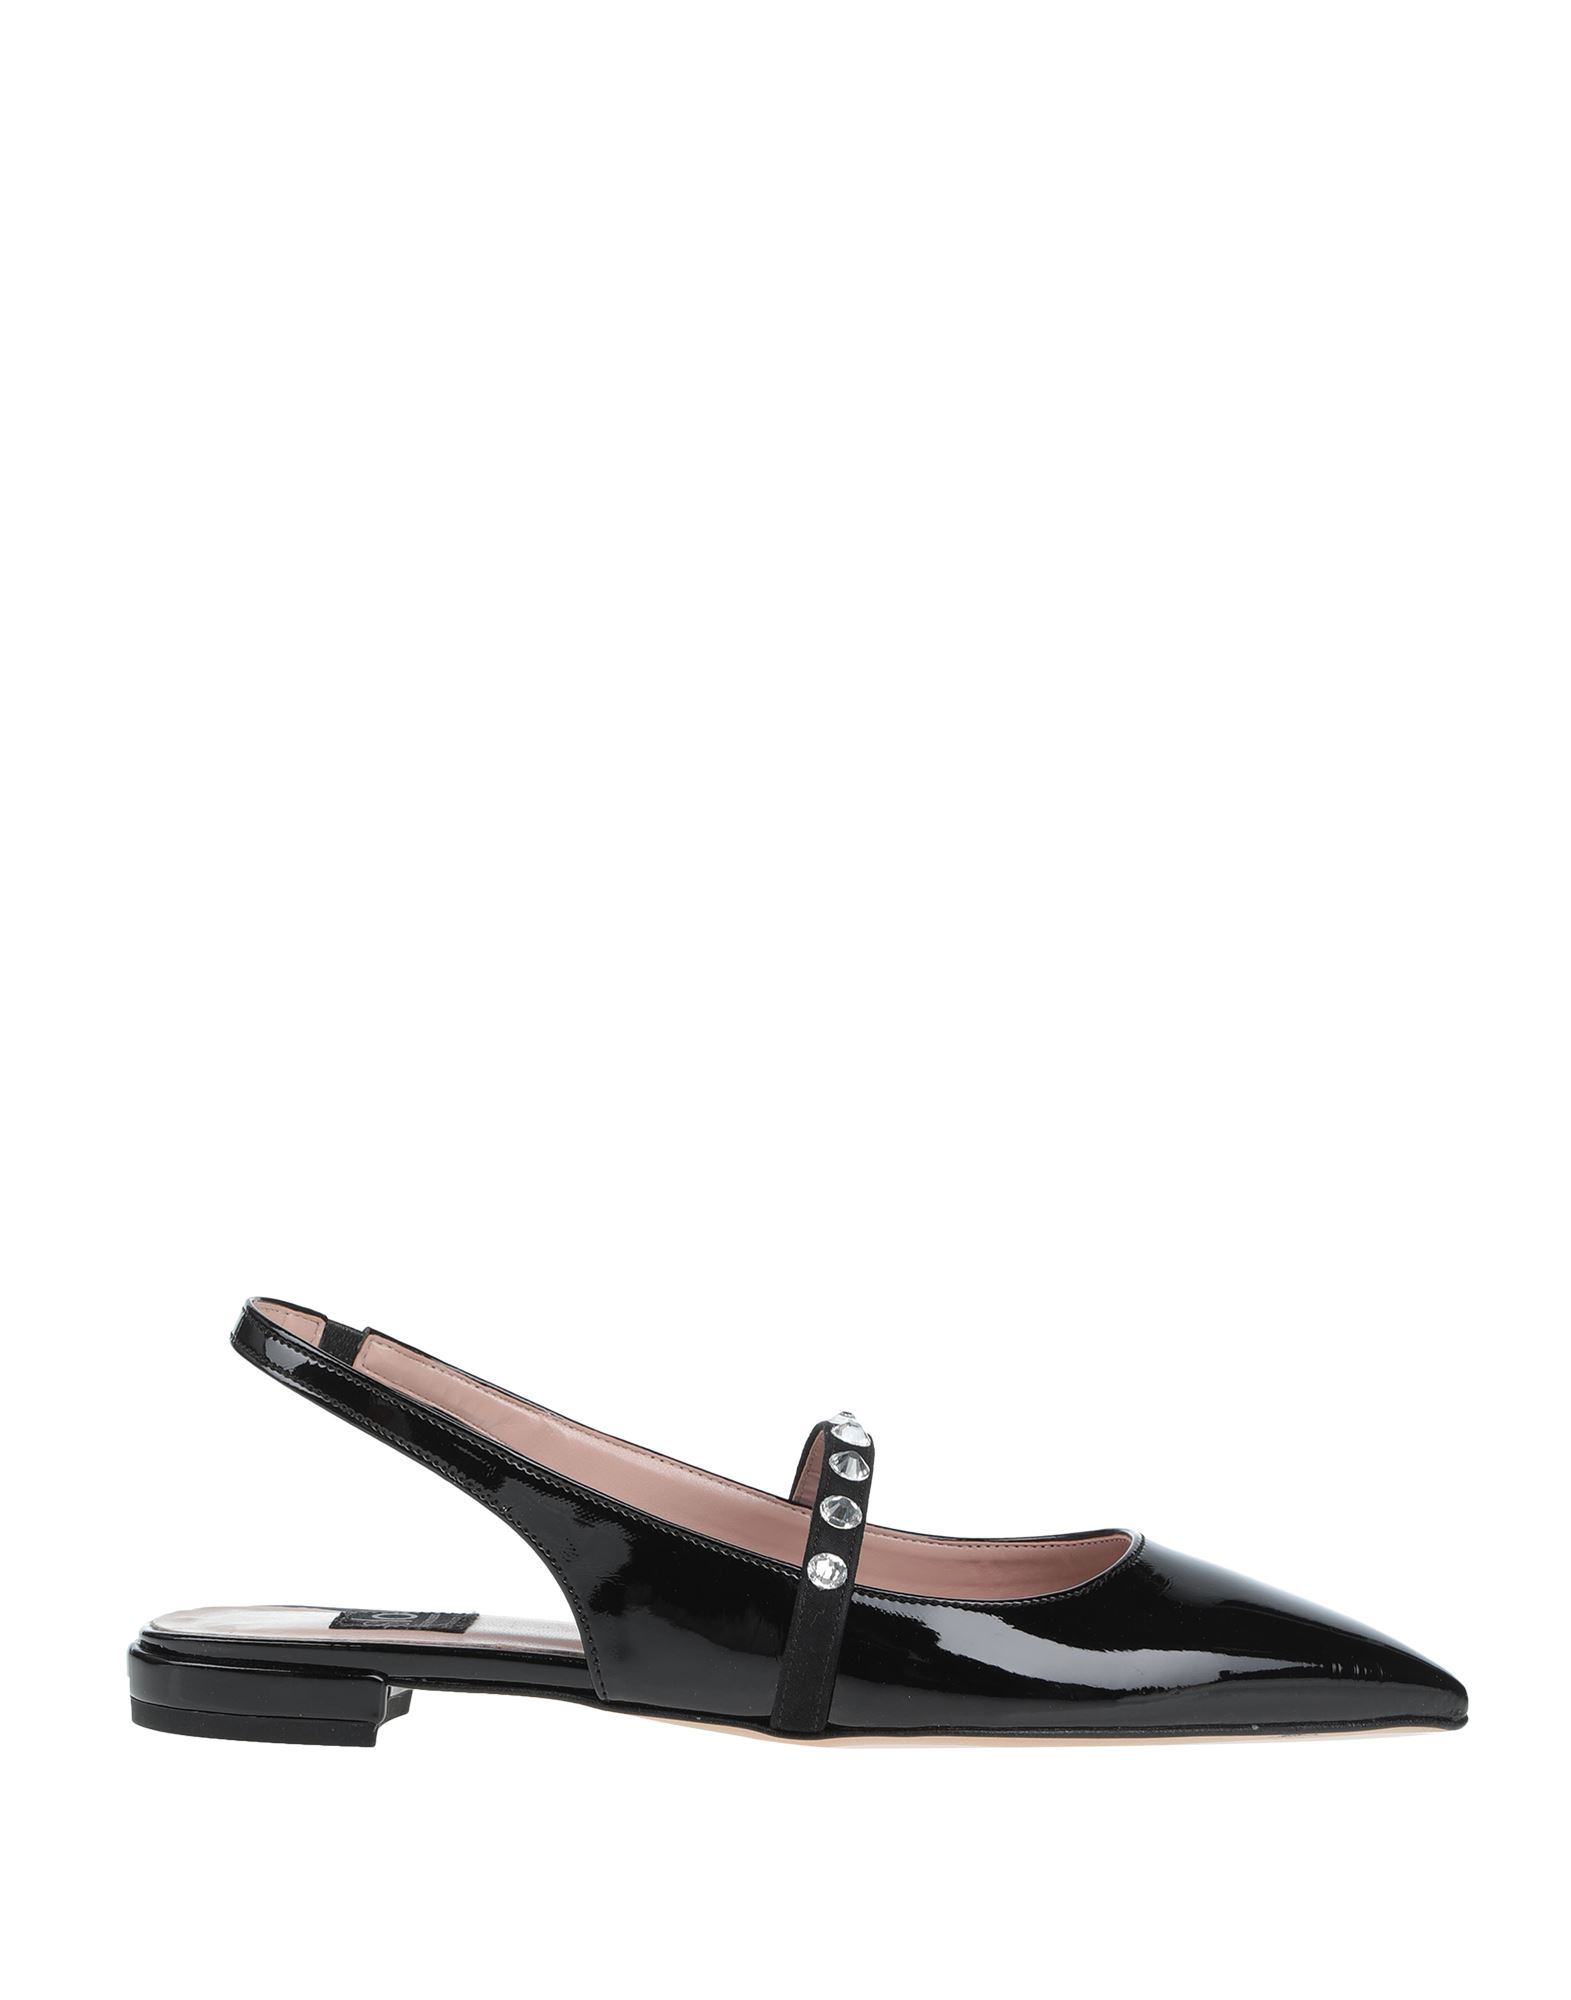 Best Selling ISLO ISABELLA LORUSSO Ballet flats | AccuWeather Shop